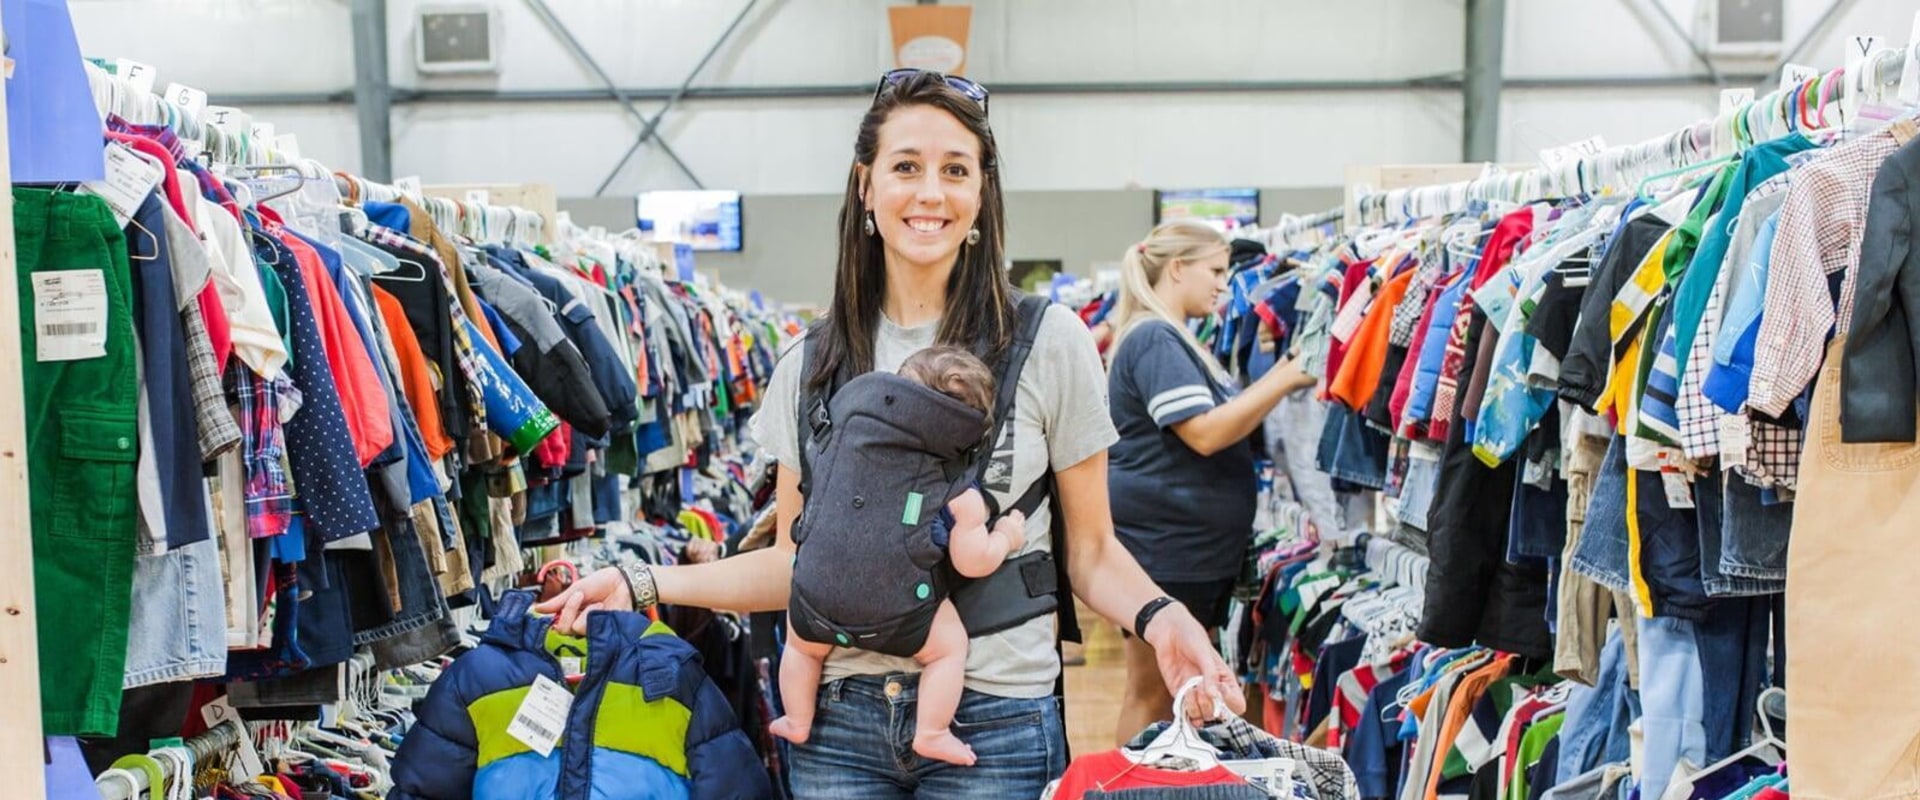 Where to Find the Best Baby Clothes in Central Oklahoma